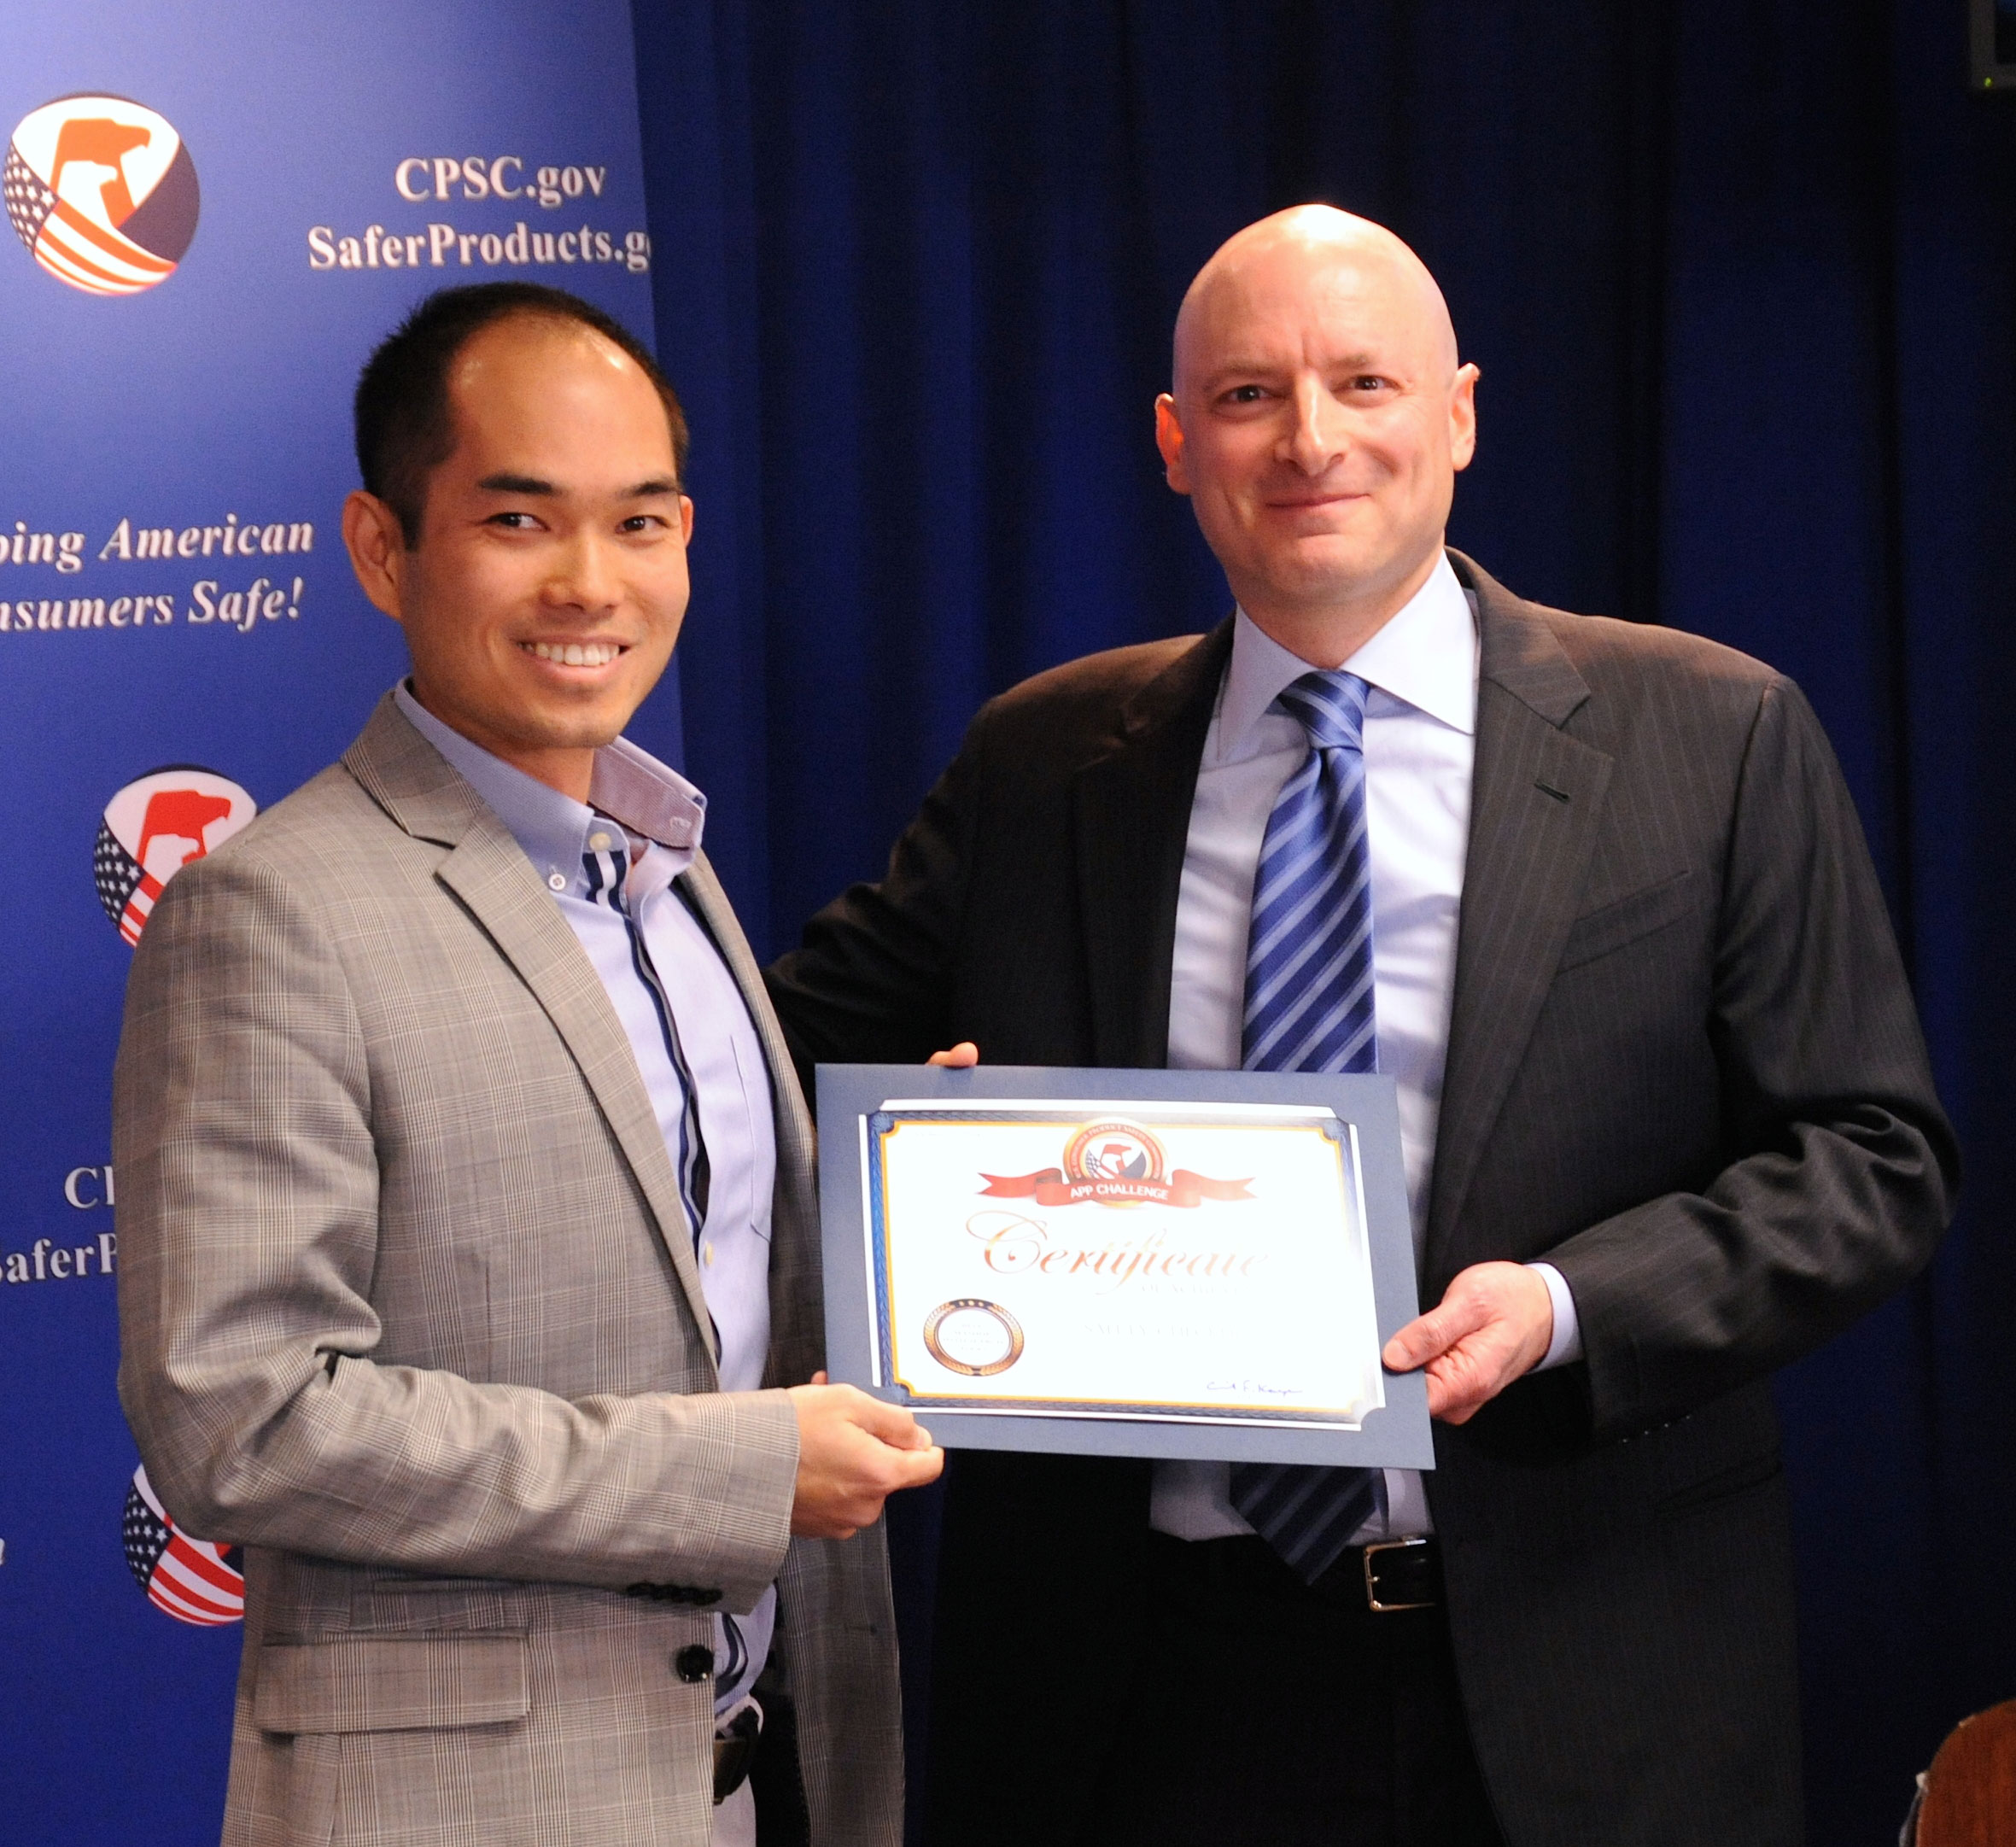 Tom Nguyen receives his certificate from Chairman Kaye. Tom won “Most Innovative” category for his Safety Checker app.